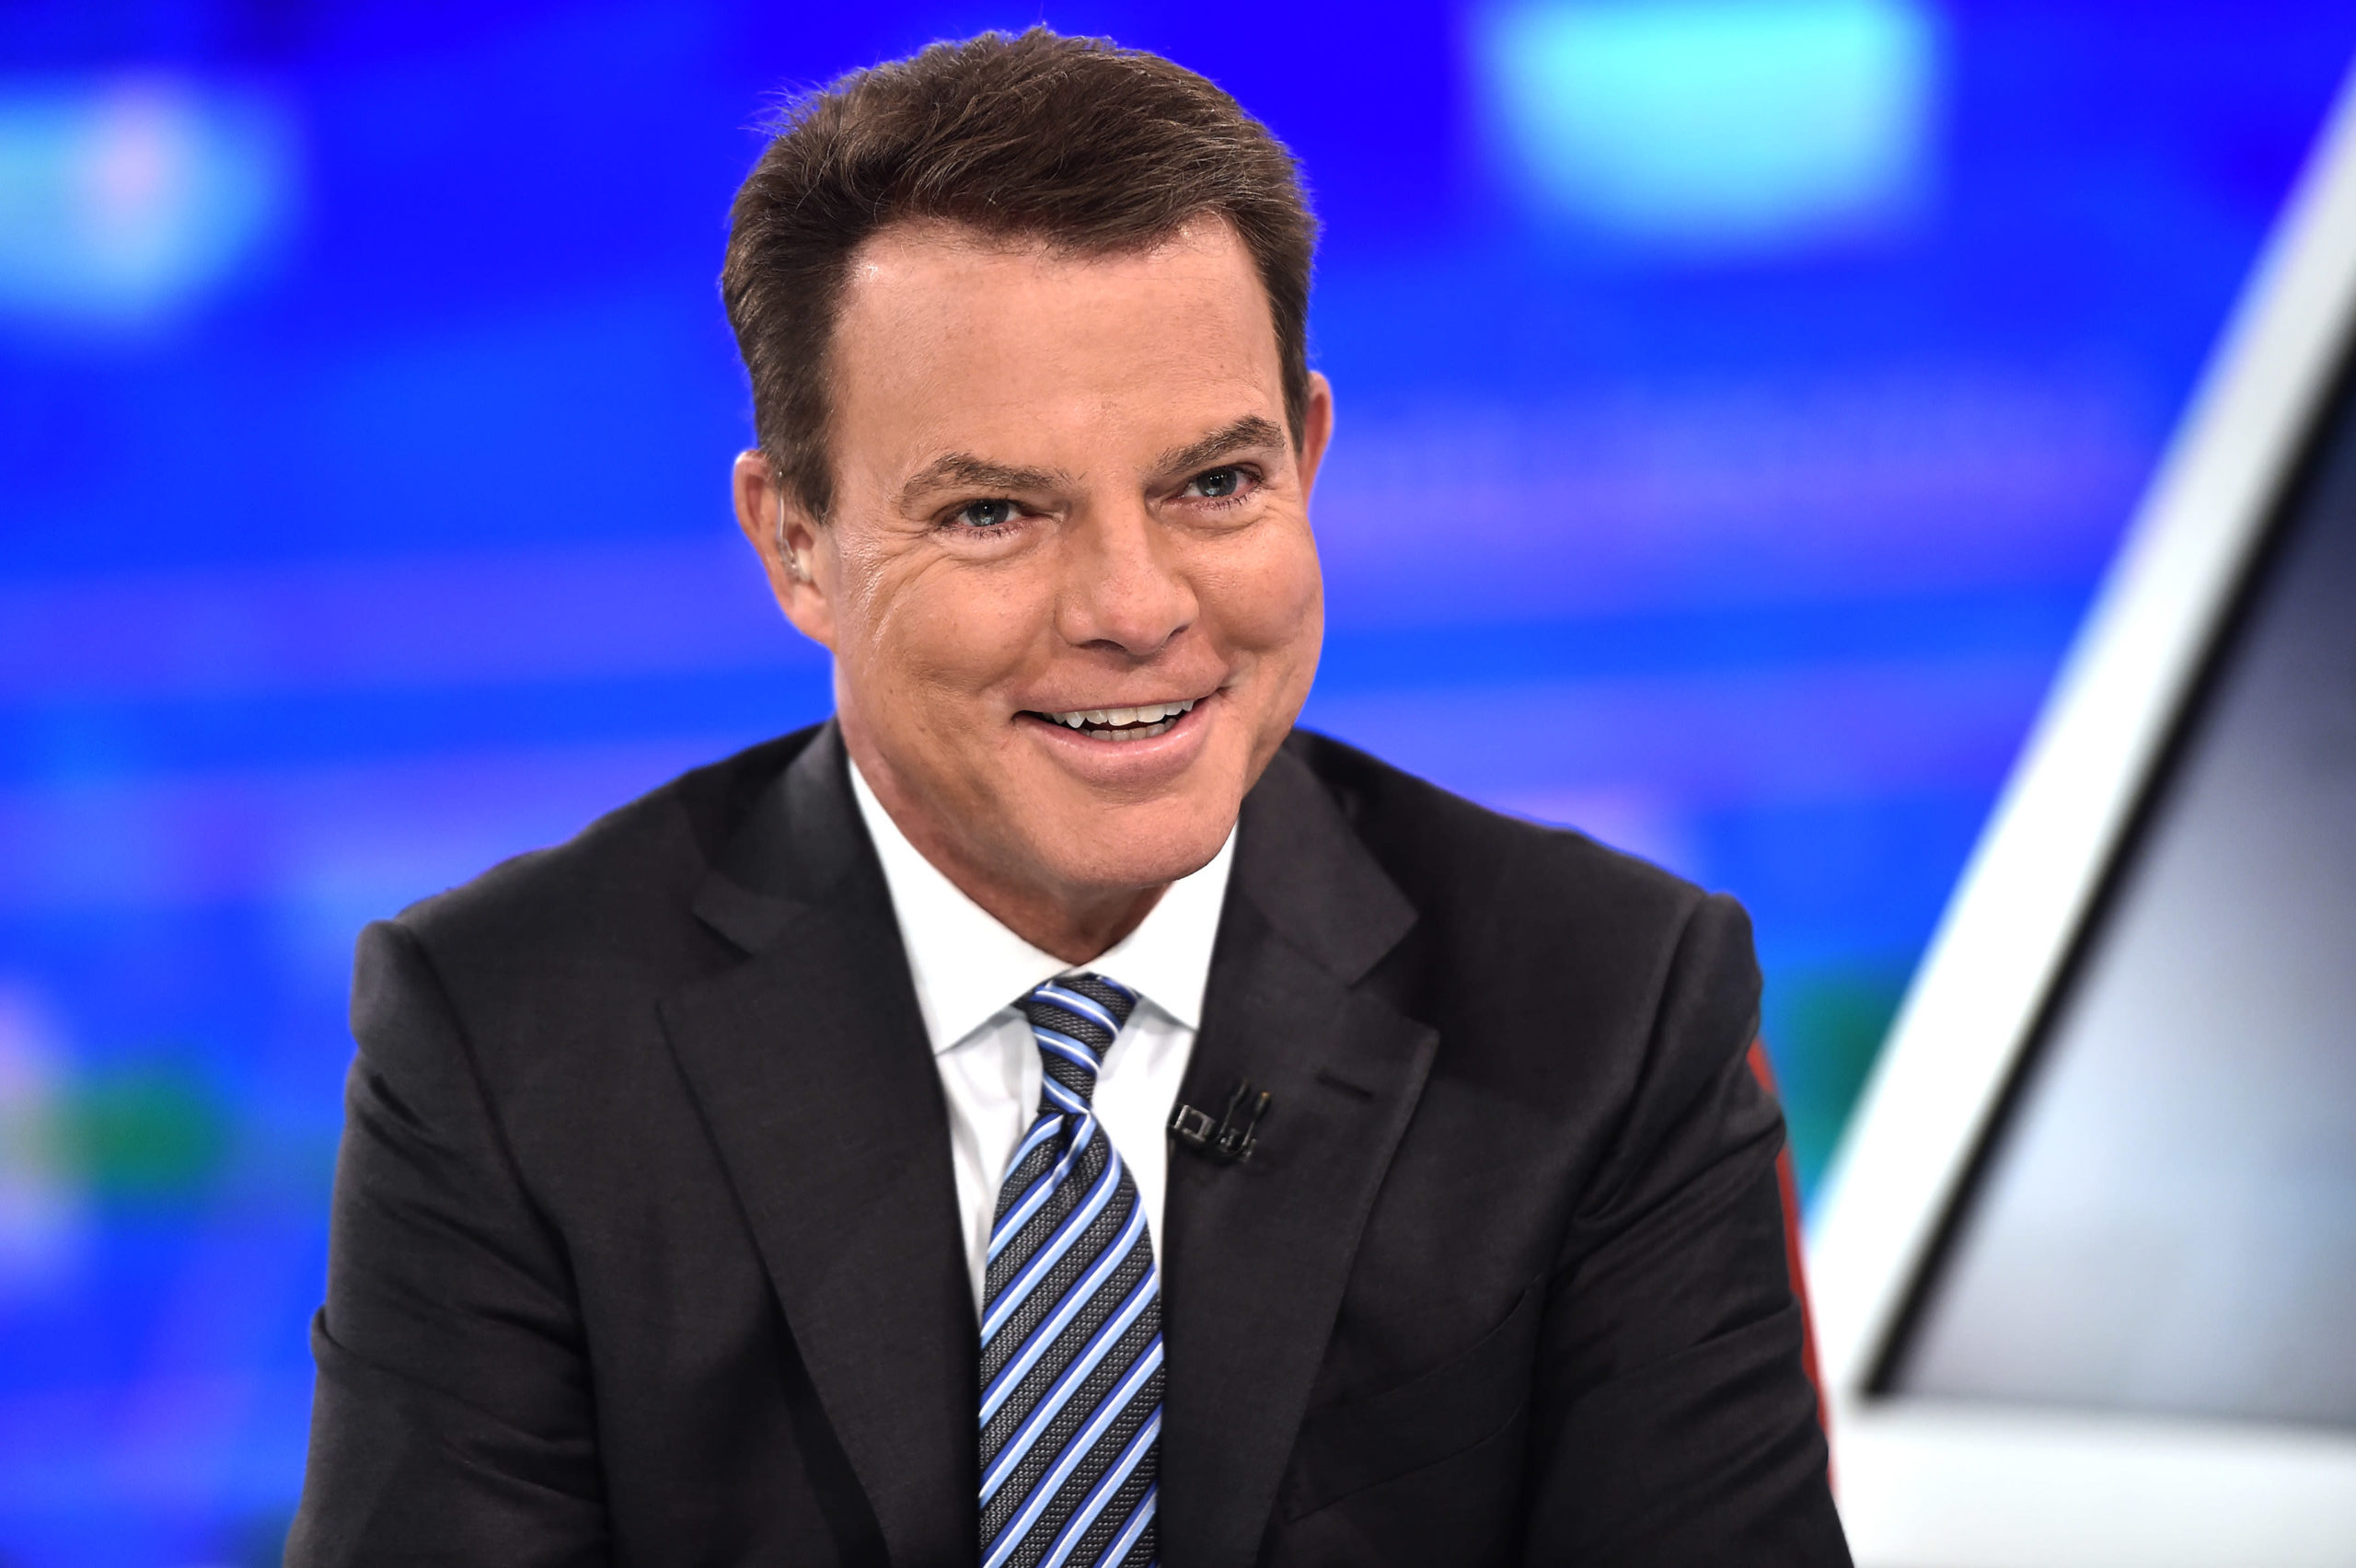 Former Fox Information anchor Shepard Smith joins CNBC with new night present